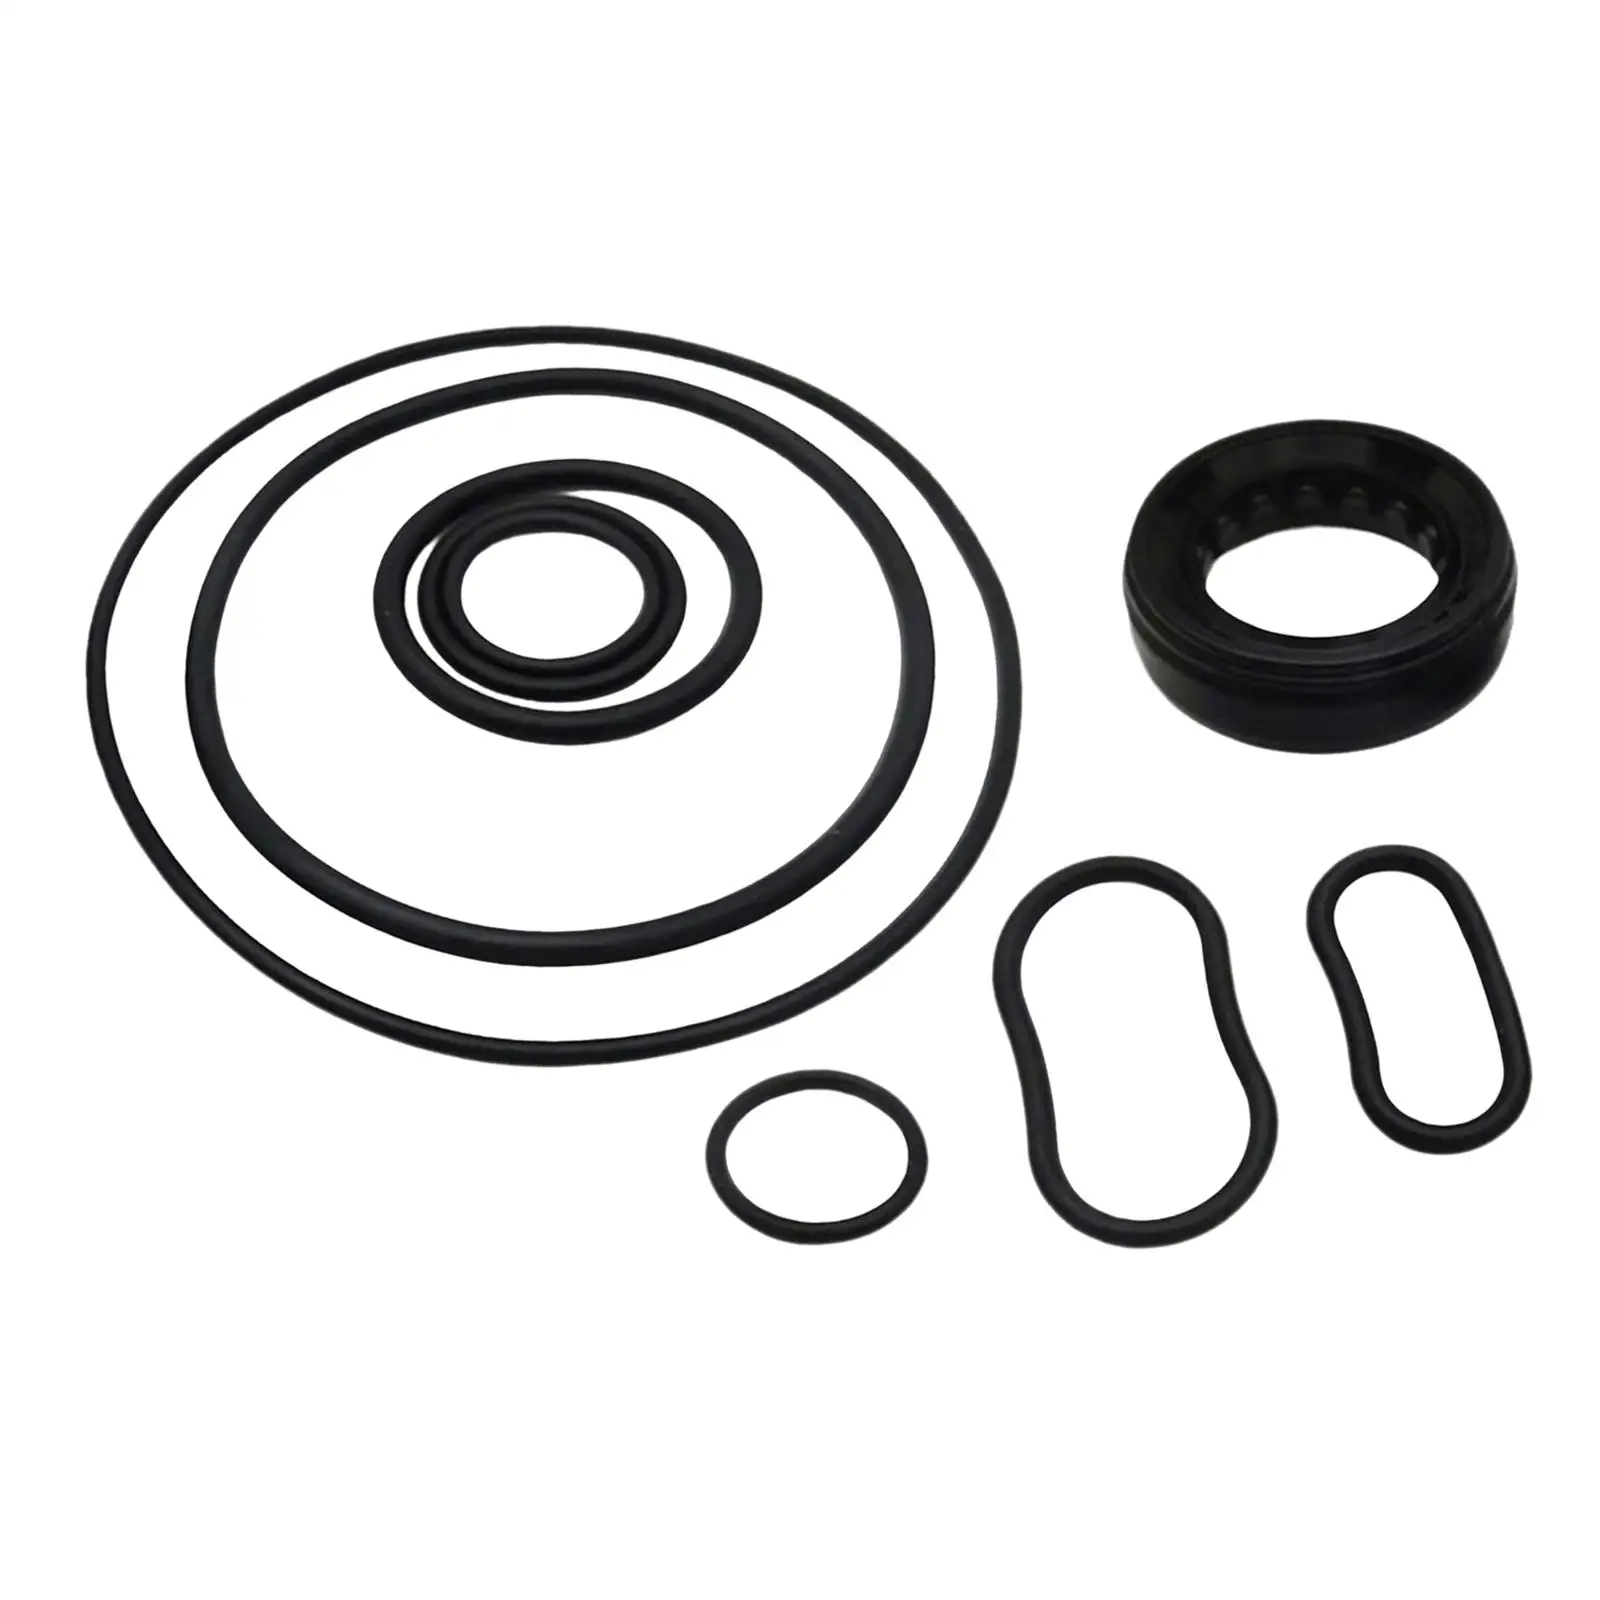 Power Steering Pump Seal Repair Kit 06539-Pnc-003 Auto Replacement Parts Professional with O Rings for   2003-07